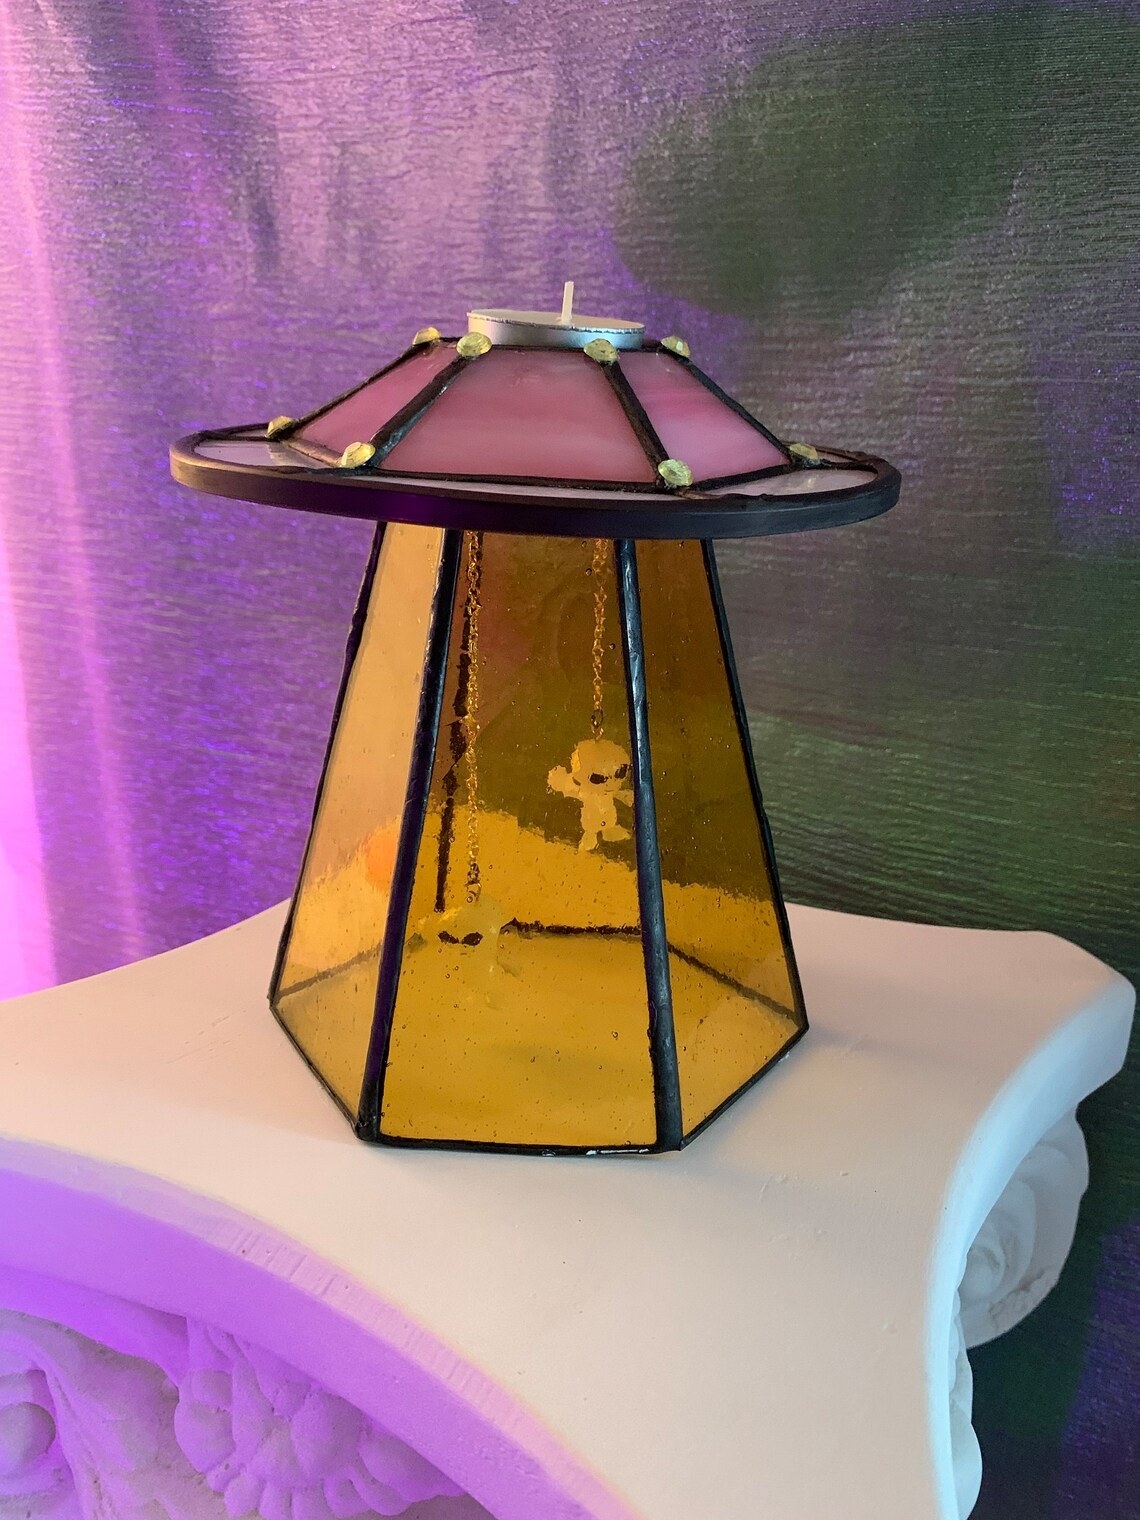 stained glass ufo with beam and two plastic aliens hanging inside with chains. the tea light goes on top